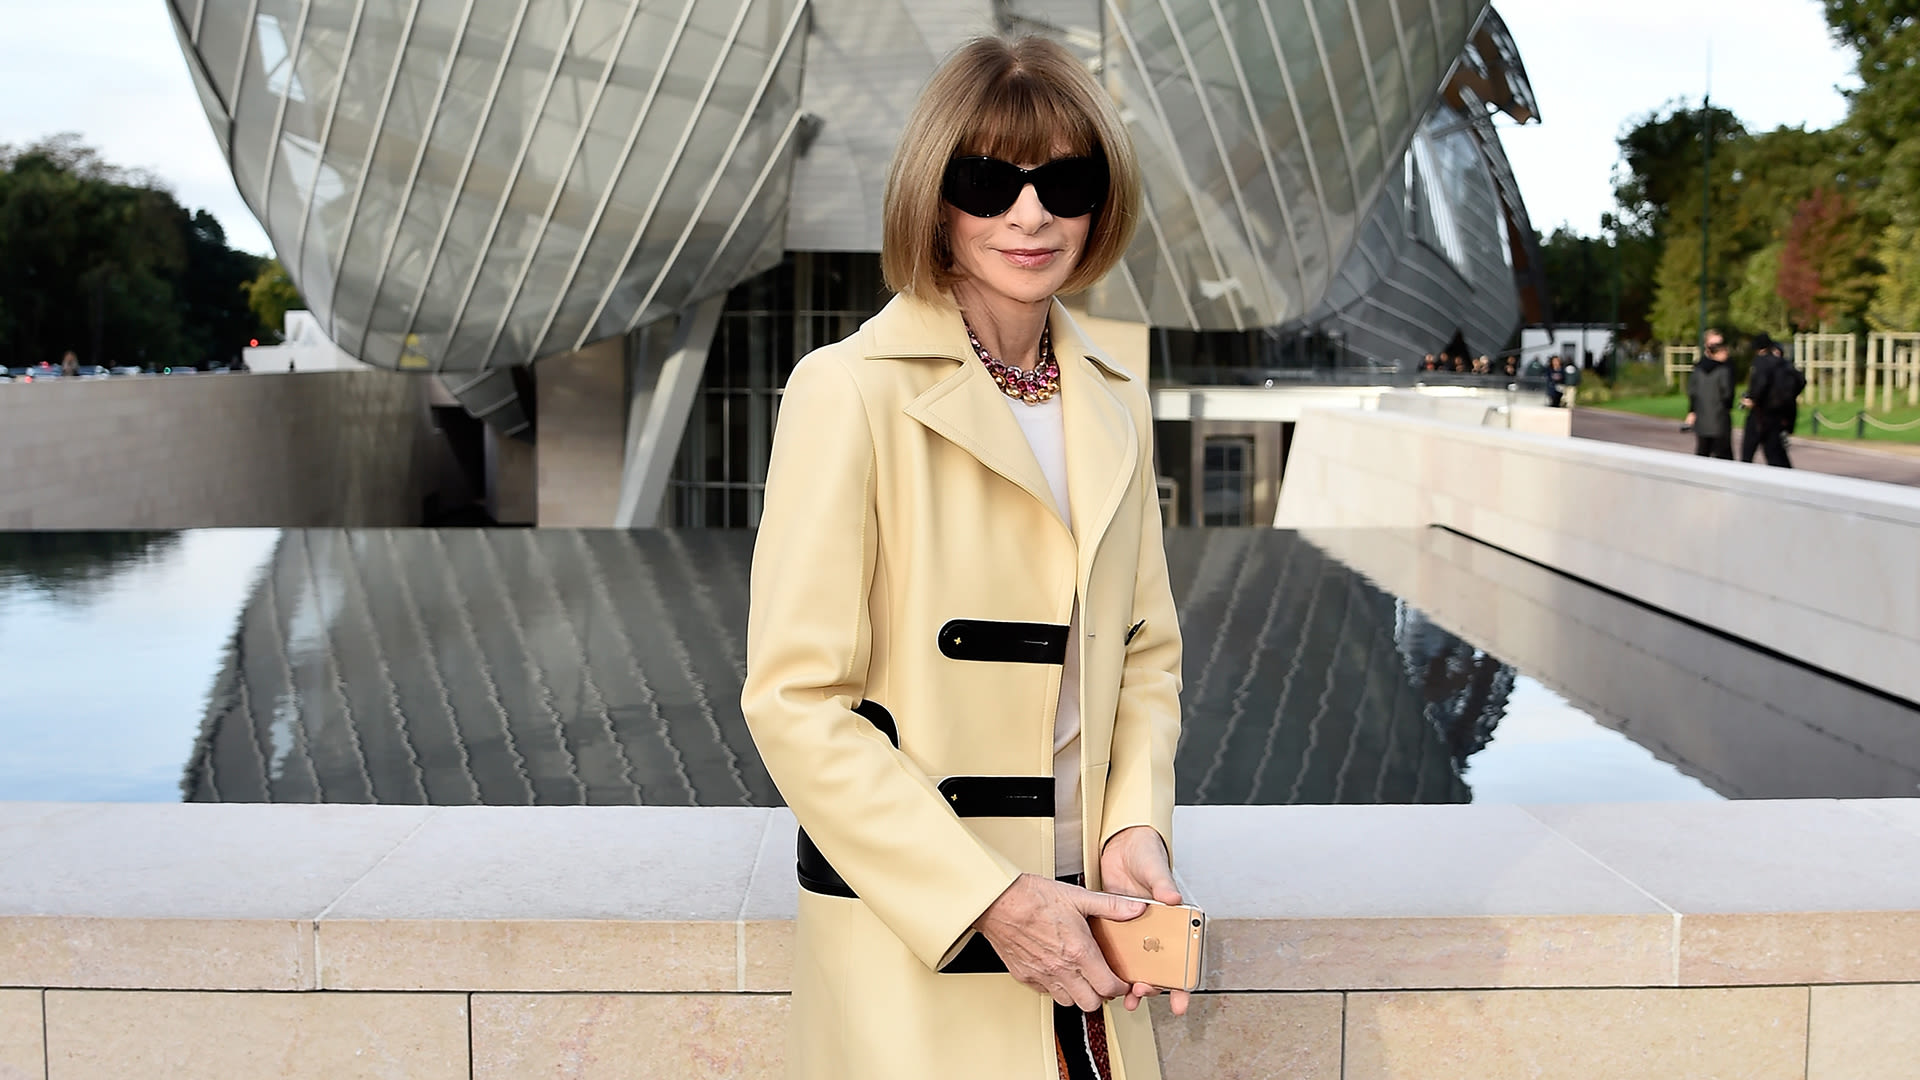 Watch Paris Fashion Week Highlights: Vogue's Anna Wintour on All the Top  Shows, Vogue Fashion Week